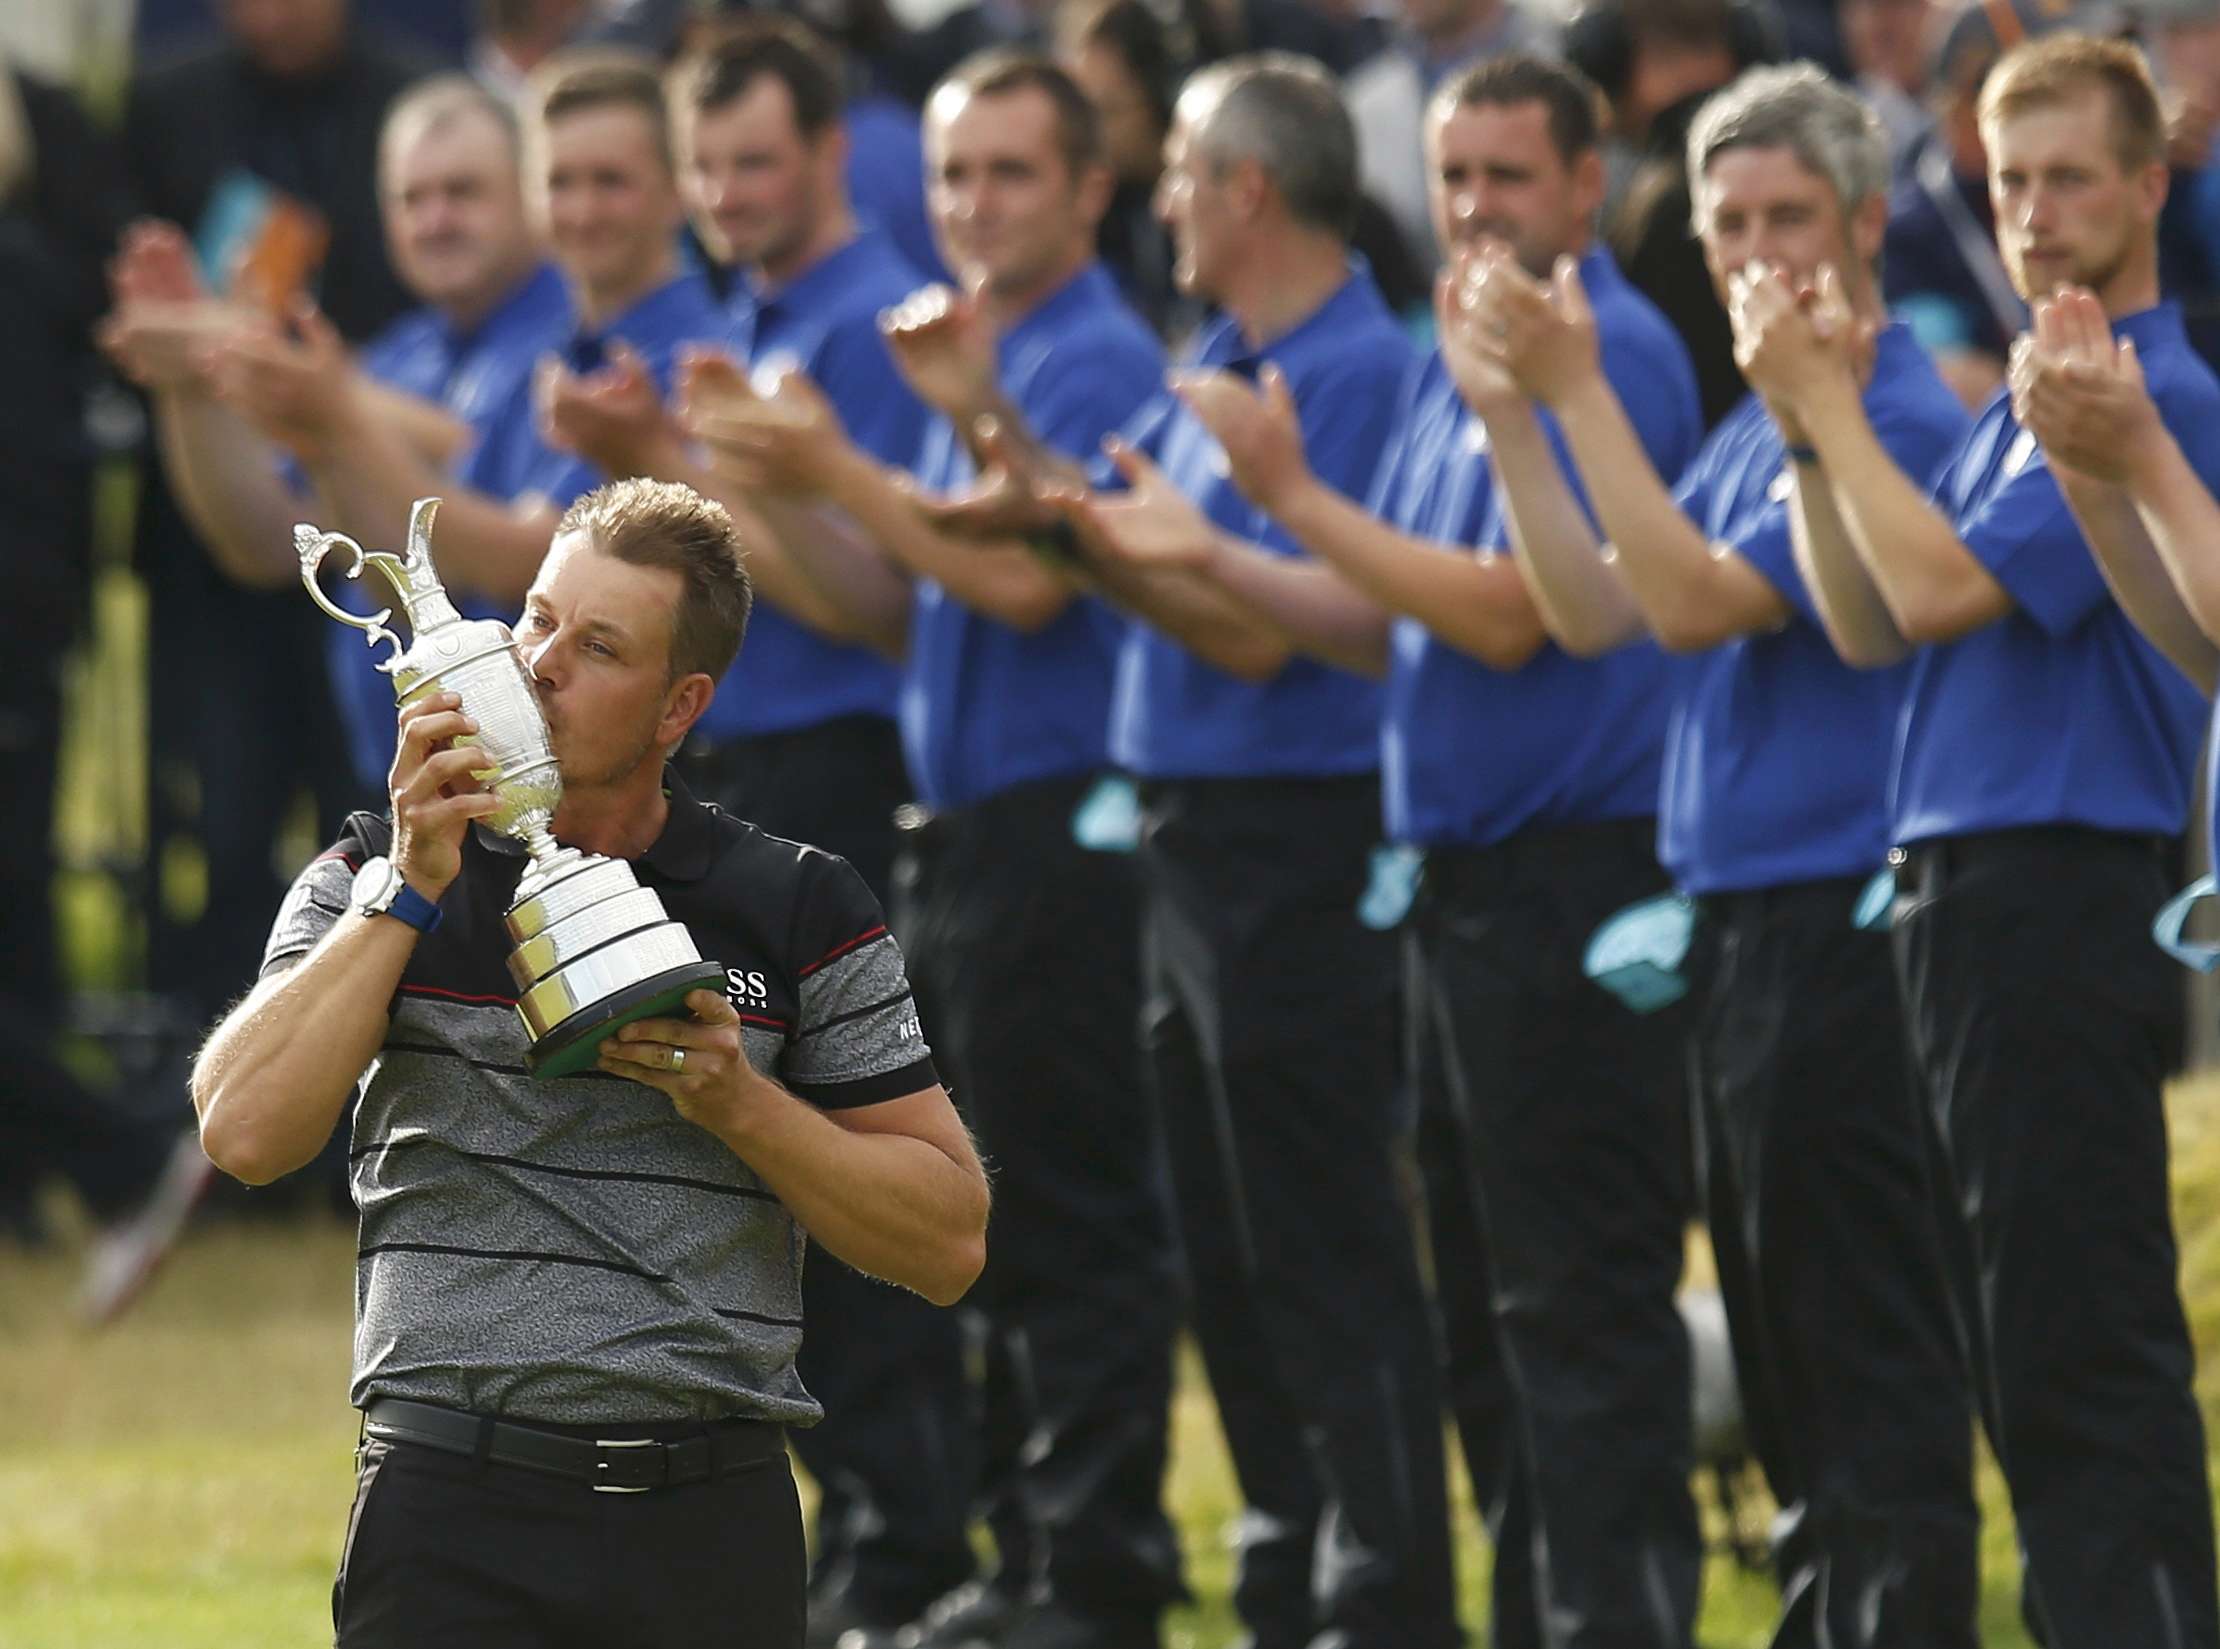 Sweden's Henrik Stenson kisses the Claret Jug after winning the British Open at Royal Troon in Scotland. Photo: Reuters